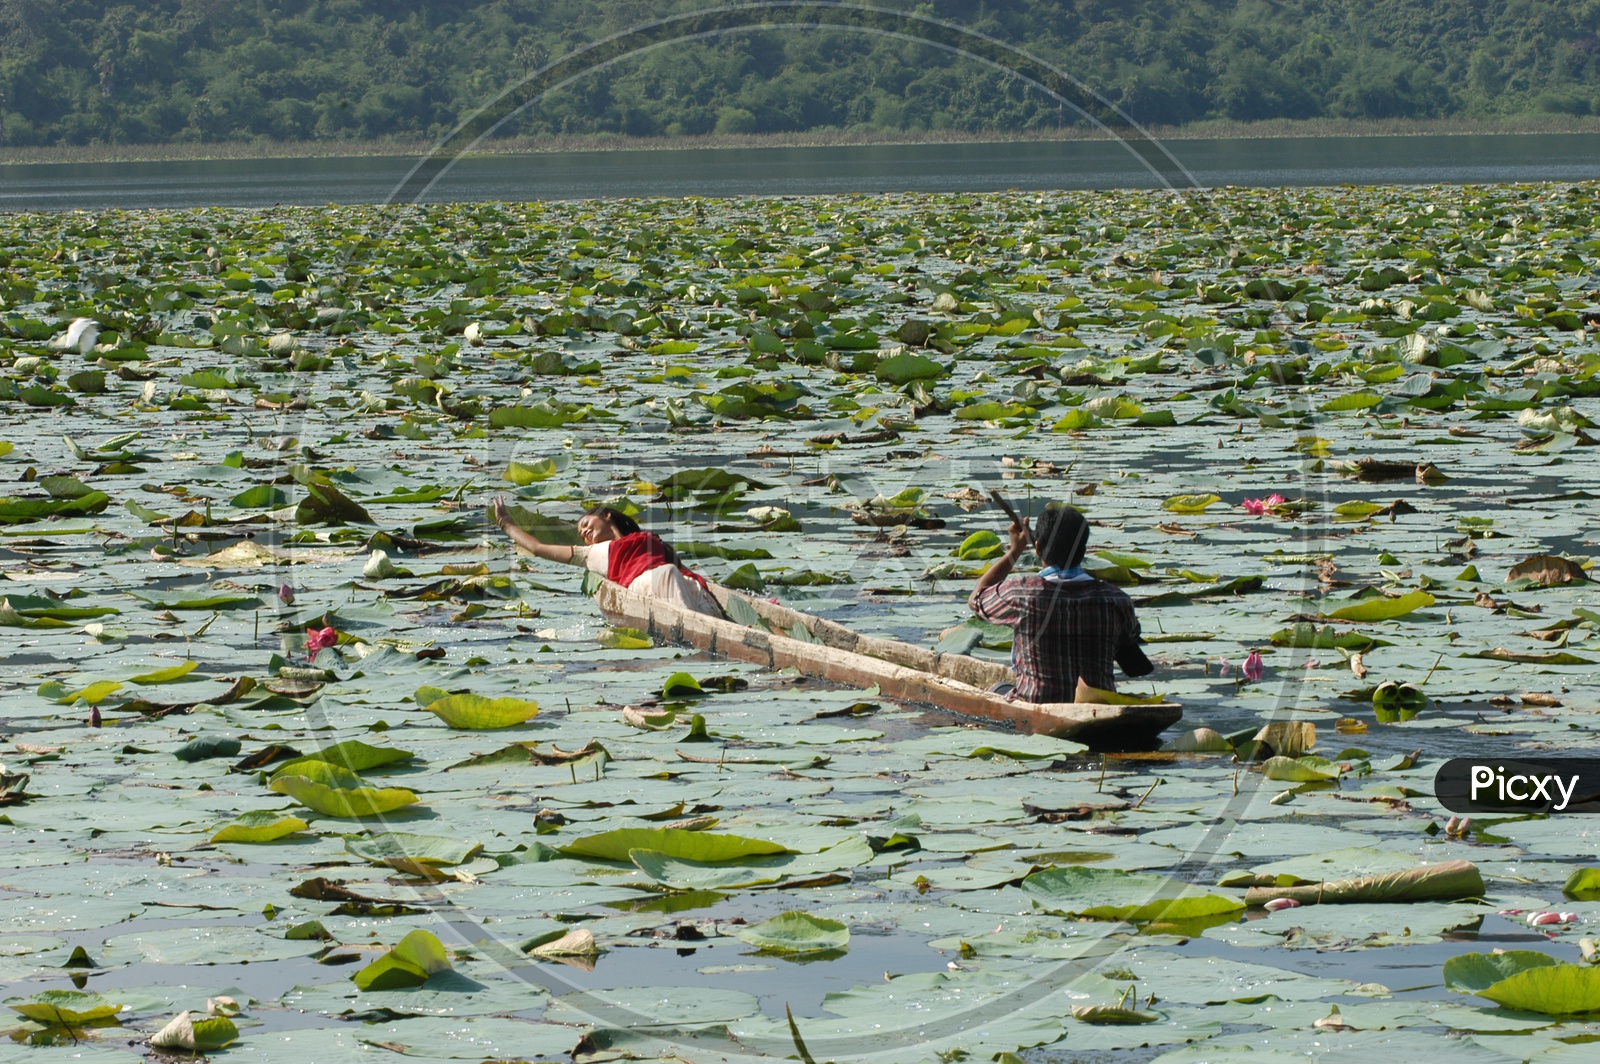 Young Indian Girl in a Wooden Boat Collecting Lotus Flowers in River